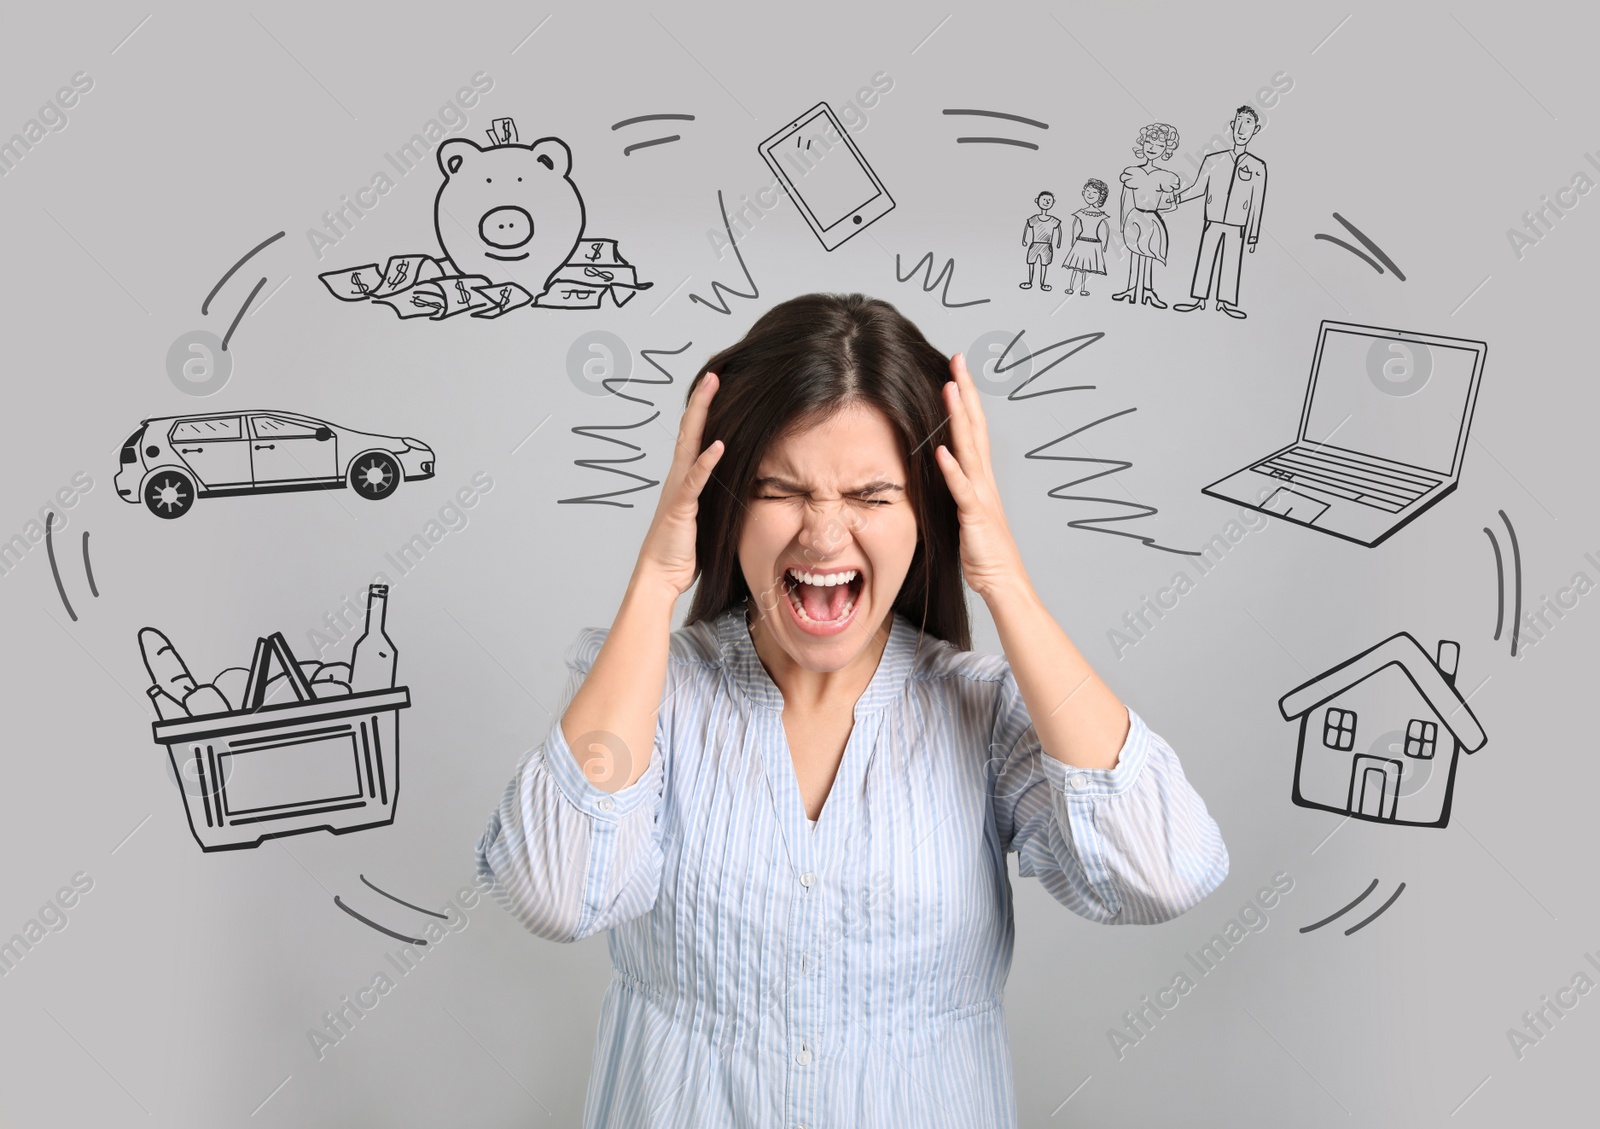 Image of Overwhelmed woman and illustration of different tasks around her on light grey background